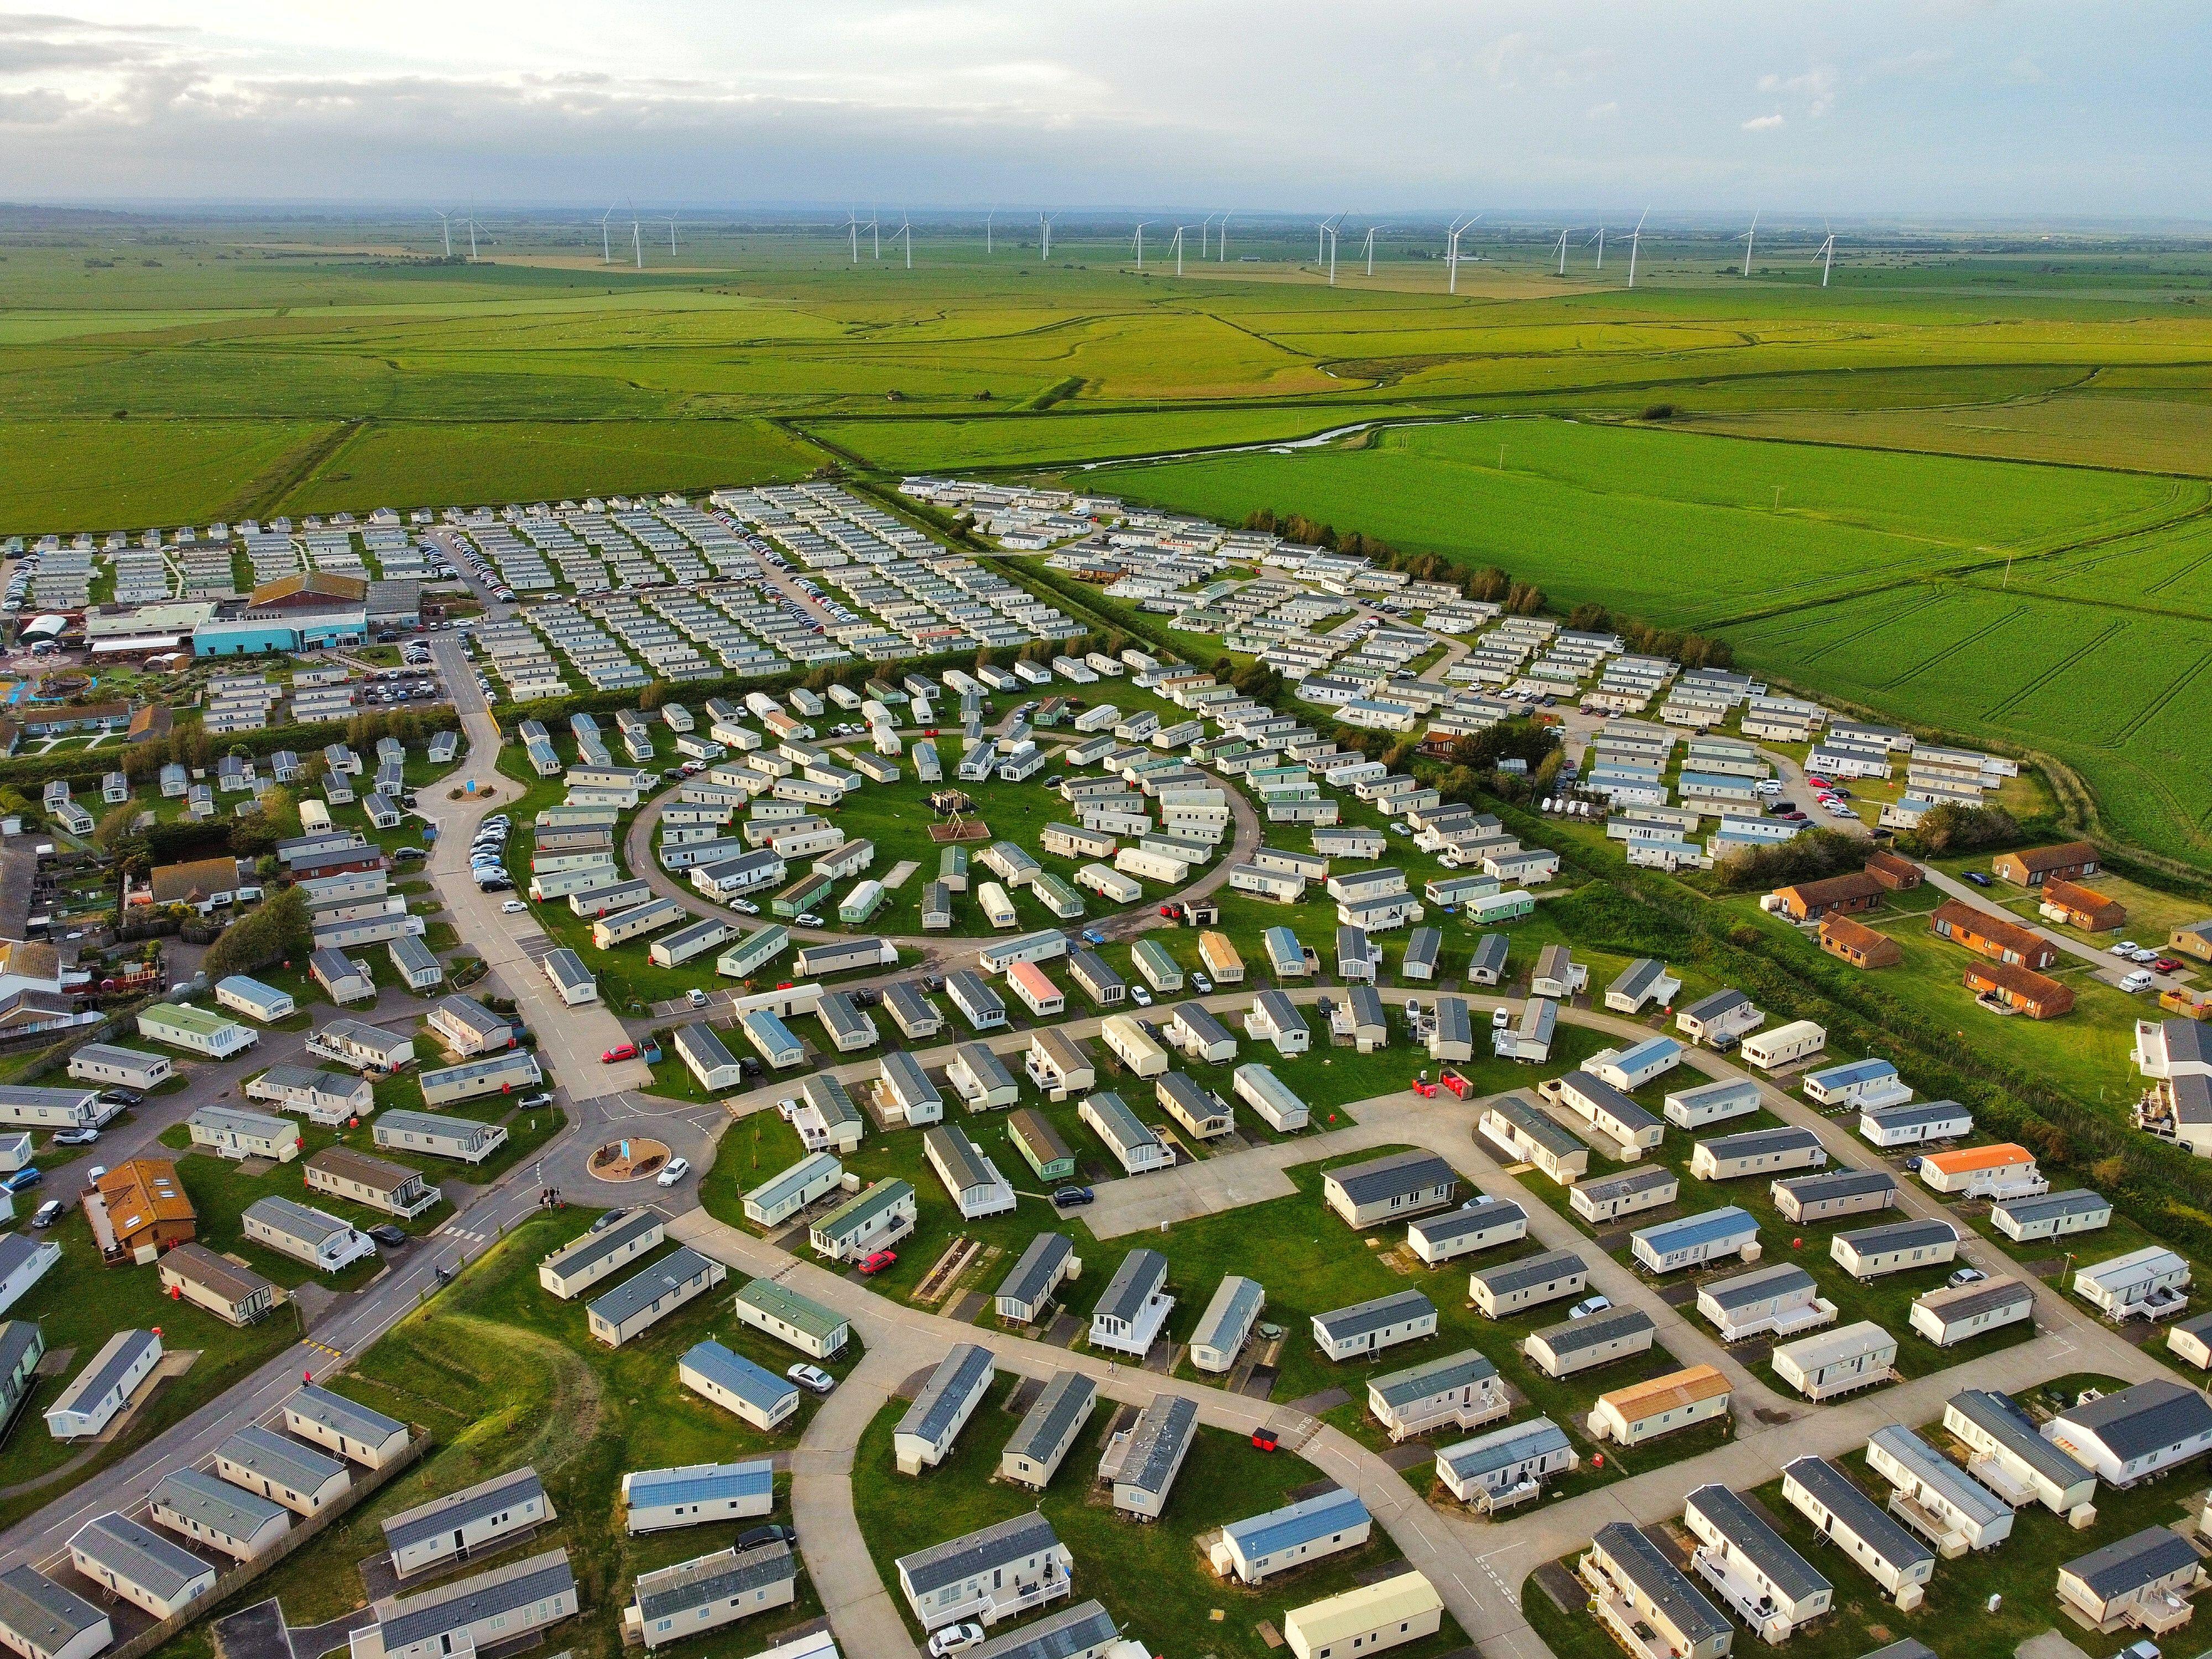 Parkdean Camber Sands in East Sussex. (ResilienceUAV / Alamy Stock Photo)